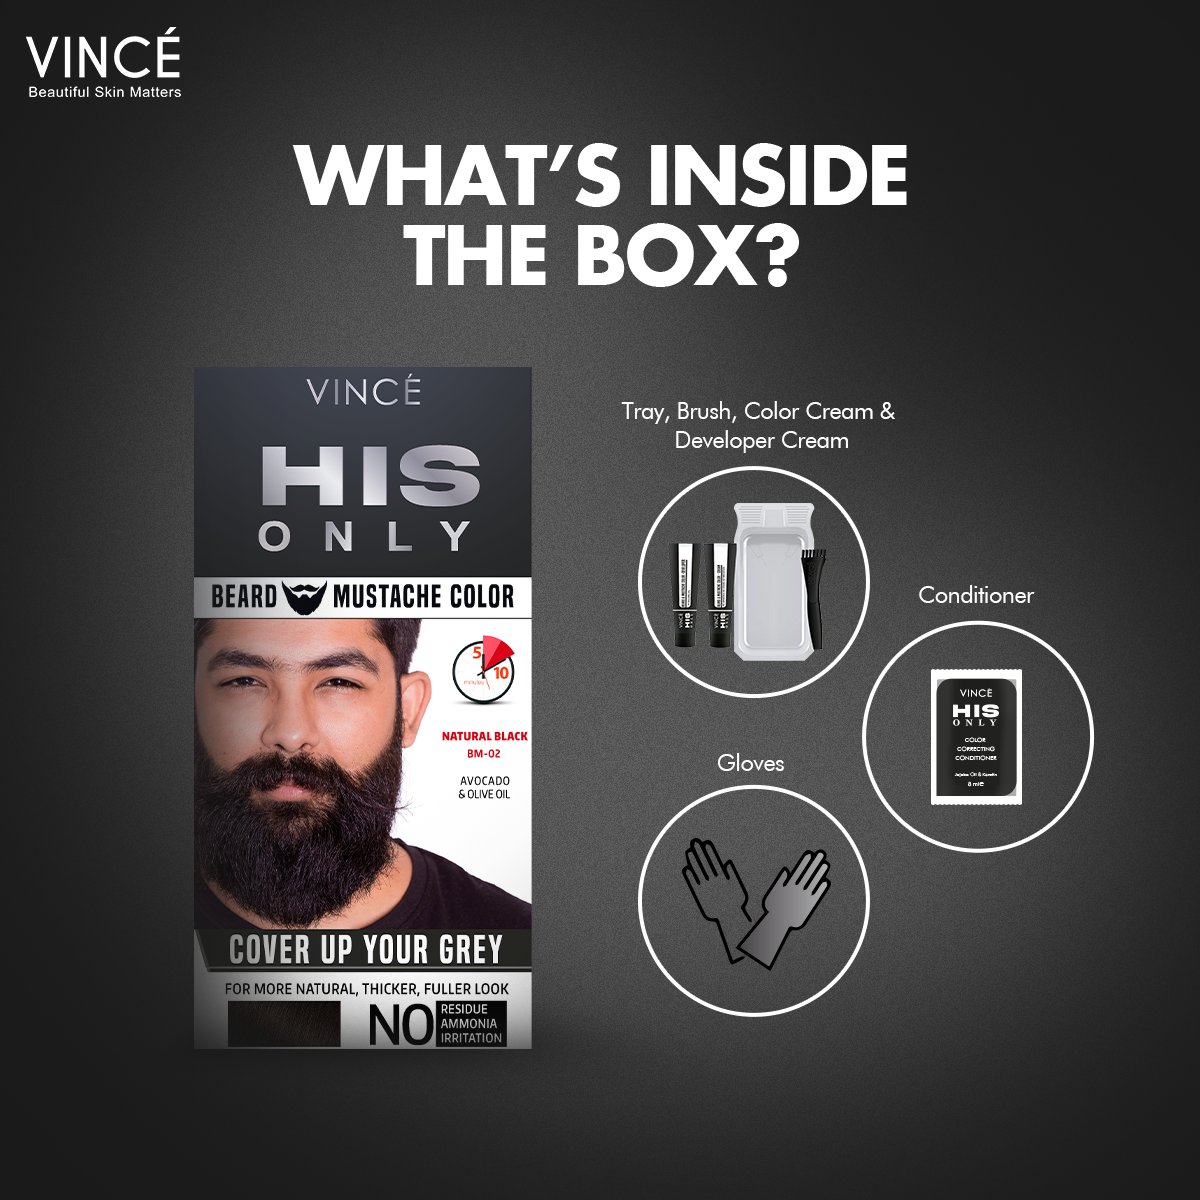 What’s inside the box? Everything you need to color your Beard & Mustache. Vince HIS ONLY box contains A Brush, Tray, Color Cream, Color Developer, Conditioner, and Gloves.
.
.
.
 #UpgradeYourLook #BeardMustacheColor #HisOnly